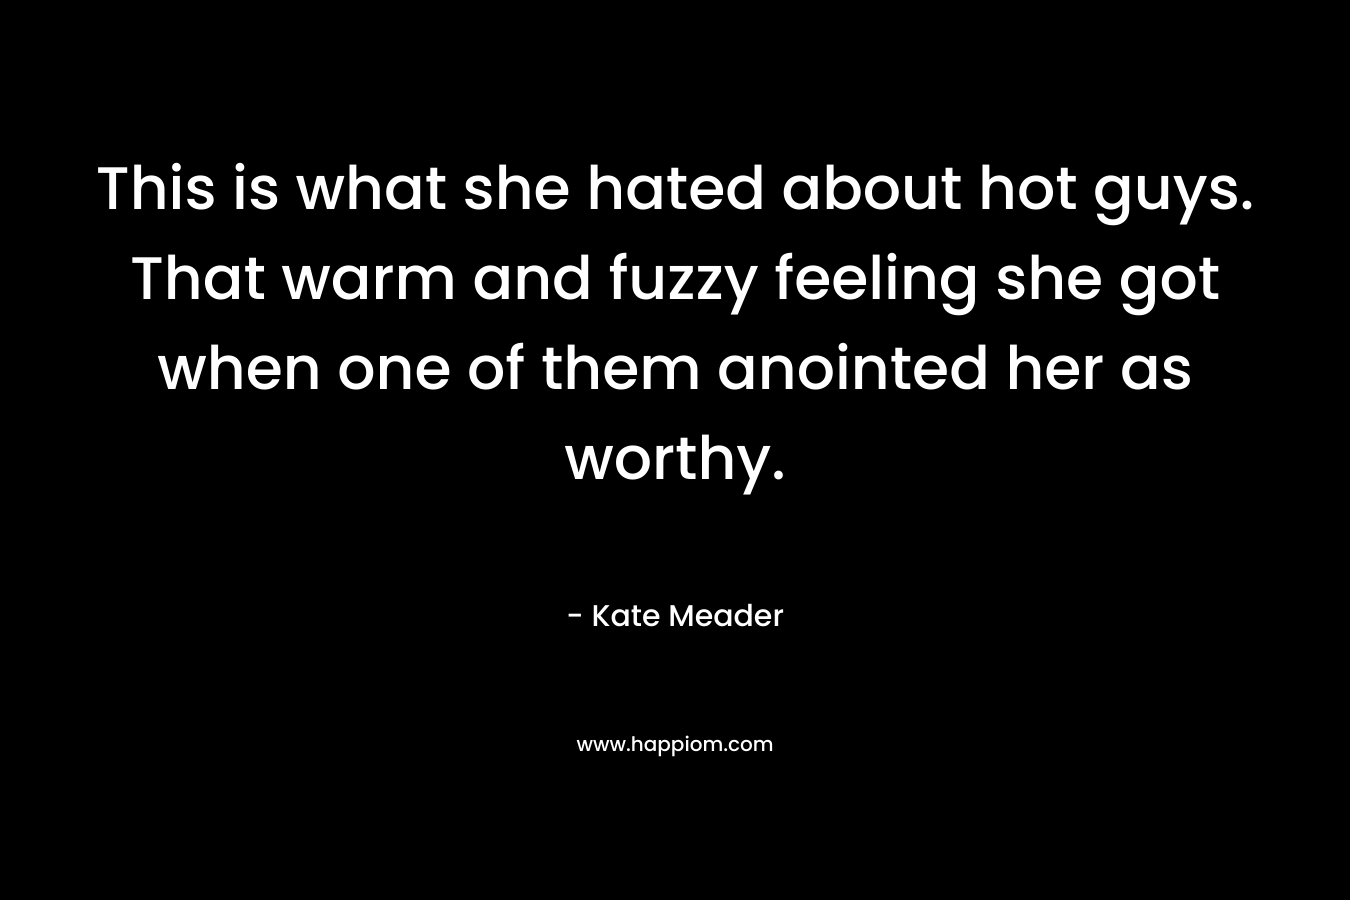 This is what she hated about hot guys. That warm and fuzzy feeling she got when one of them anointed her as worthy. – Kate Meader